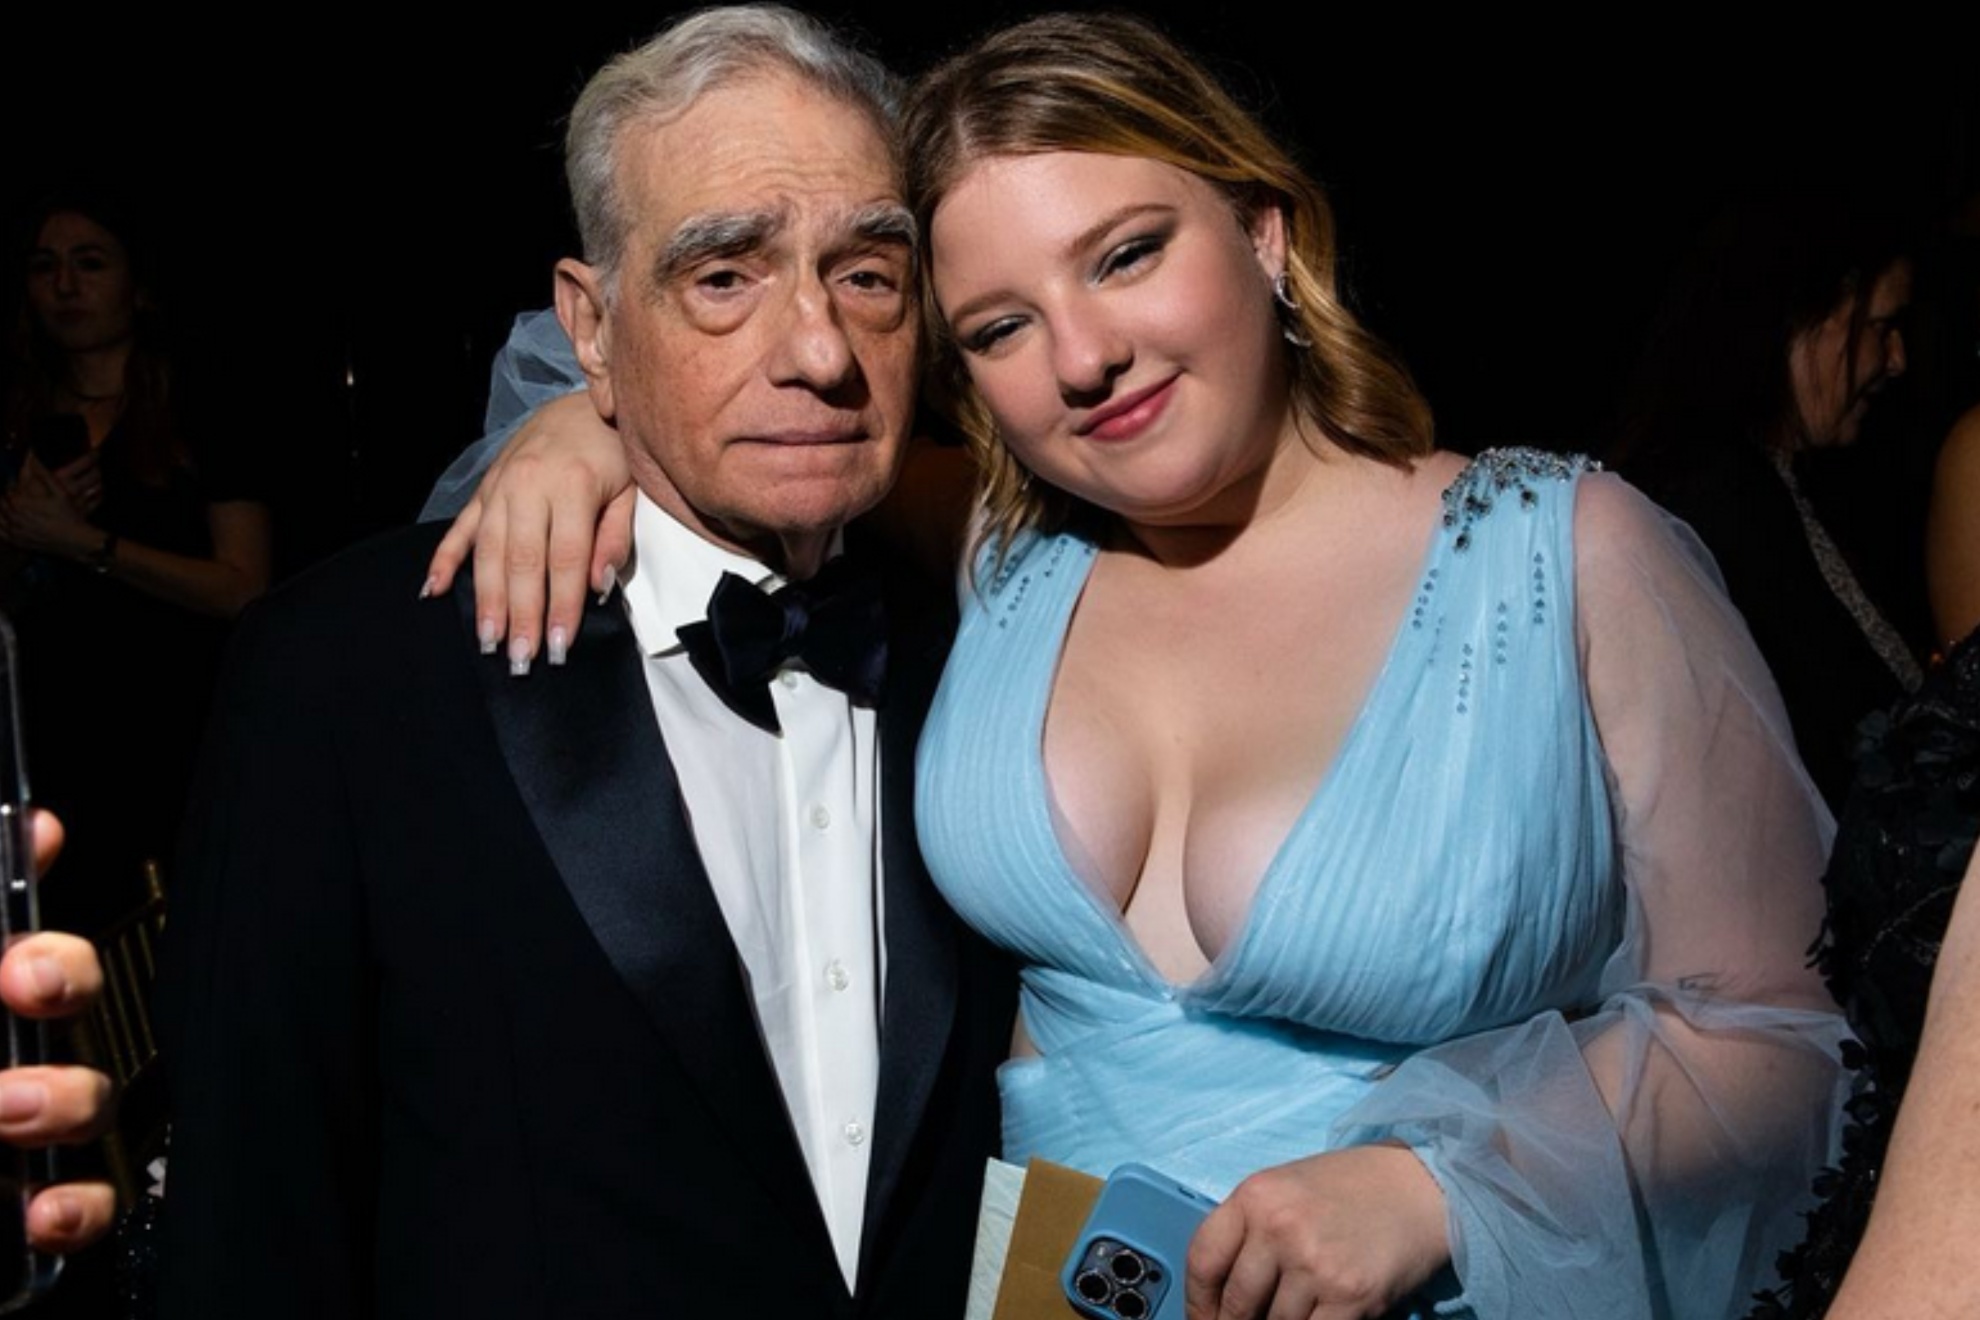 Fancesca and Martin Scorsese at their shared birthday party.